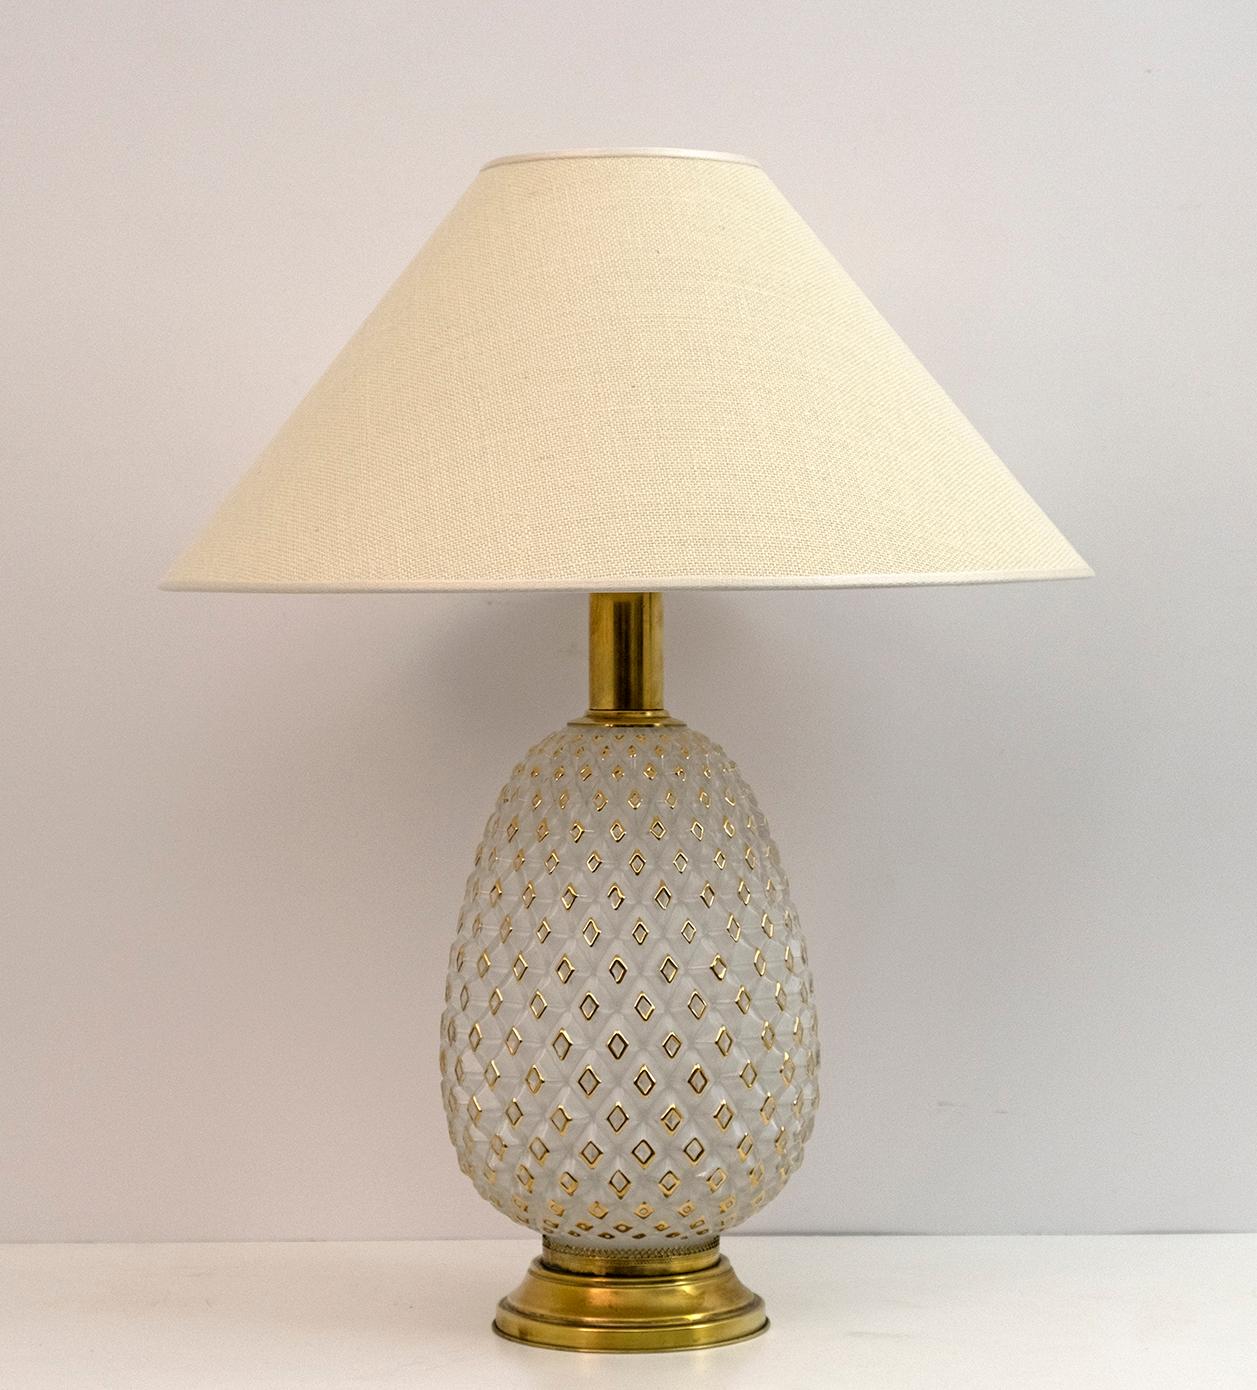 Table lamp in Murano glass blown with 18 carat gold, base and support in brass. Made by the Masters of Murano, Italy, 1970s.